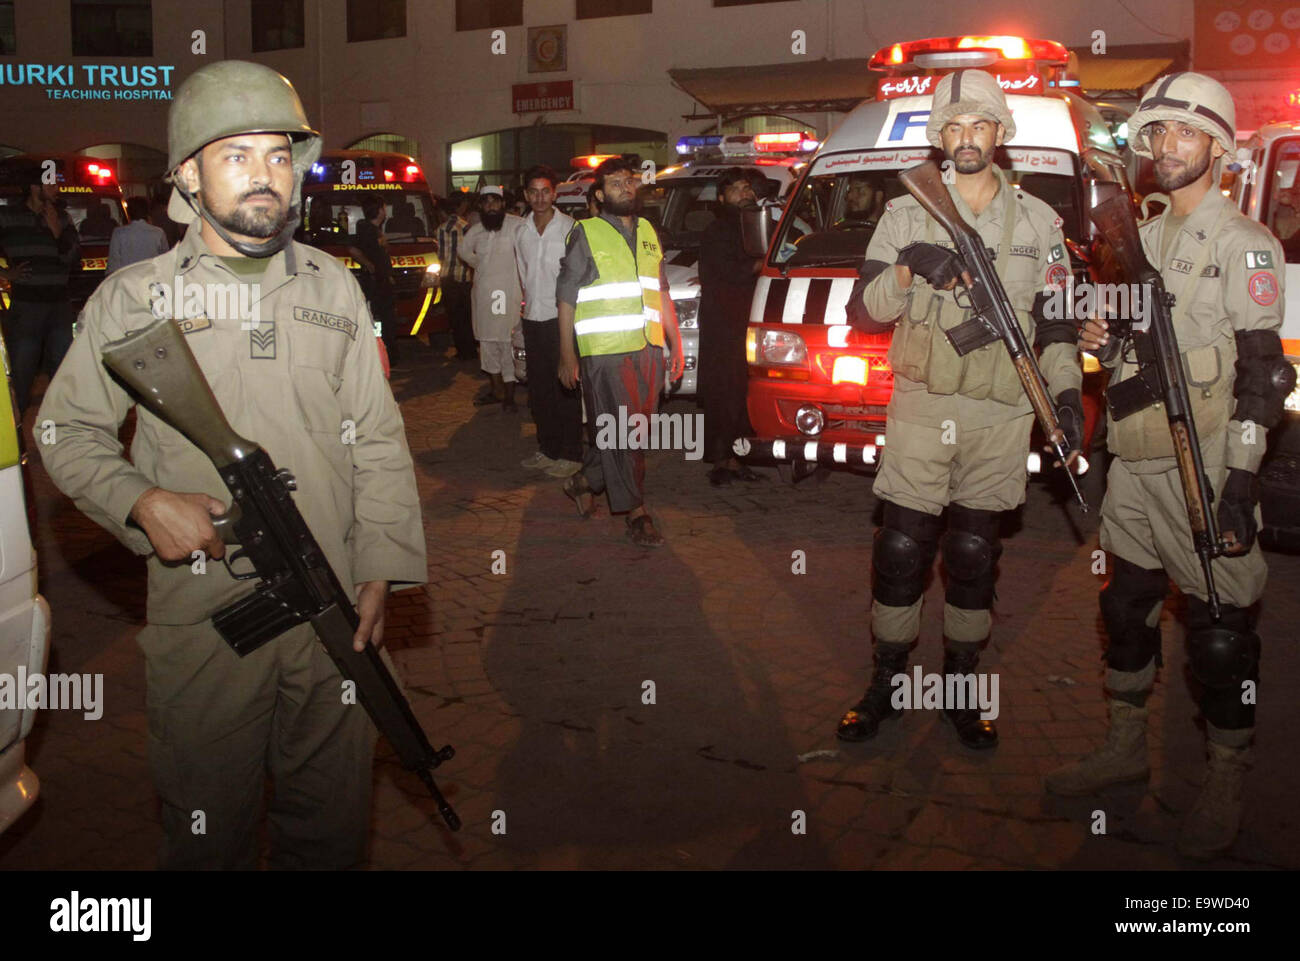 Lahore. 2nd Nov, 2014. Pakistani paramilitary troops stand guard outside a hospital in eastern Pakistan's Lahore, Nov. 2, 2014. At least 55 people were killed and 118 others injured in a suicide blast that took place near Wagah crossing point at Pak-India border in Pakistan's eastern city of Lahore on Sunday evening, police officials said. © Sajjad/Xinhua/Alamy Live News Stock Photo